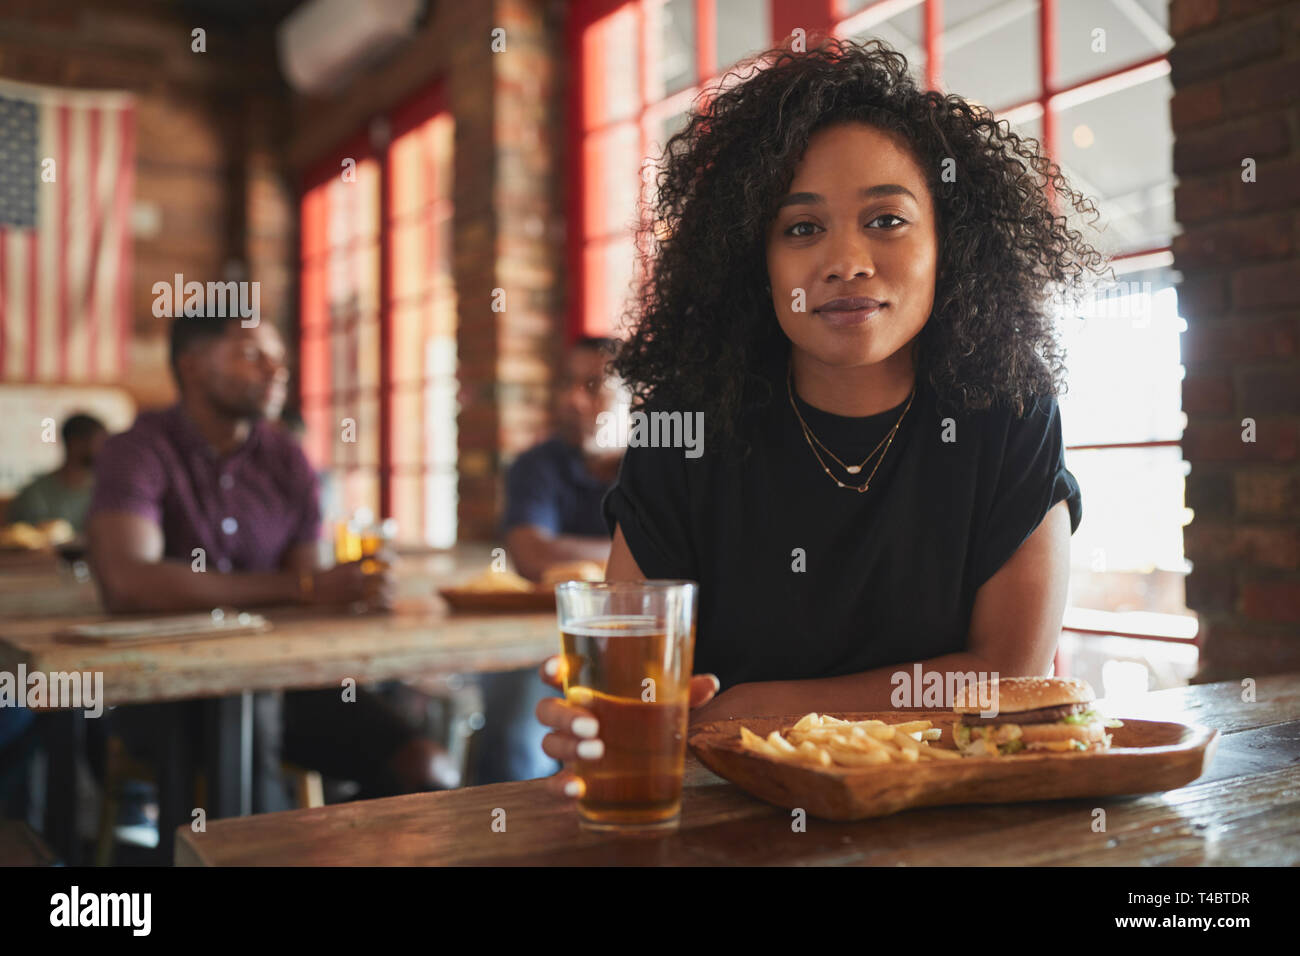 Portrait Of Woman In Sports Bar Eating Burger And Fries Stock Photo